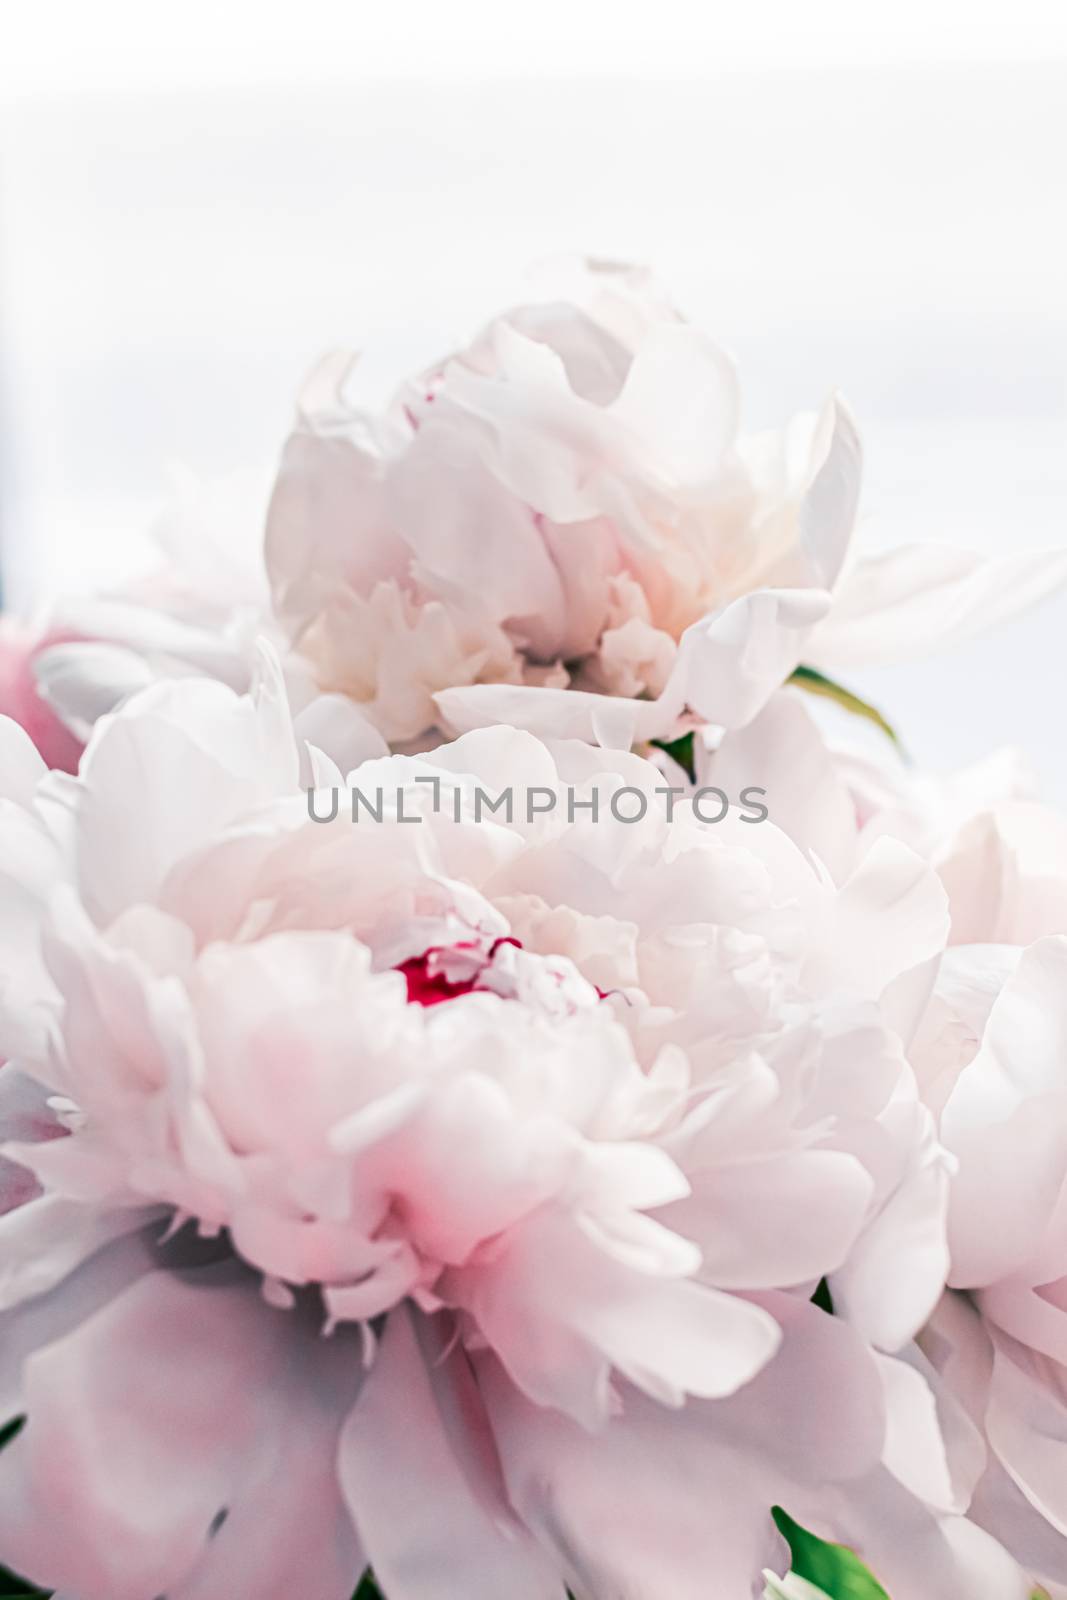 Bouquet of peony flowers as luxury floral background, wedding decoration and event branding by Anneleven